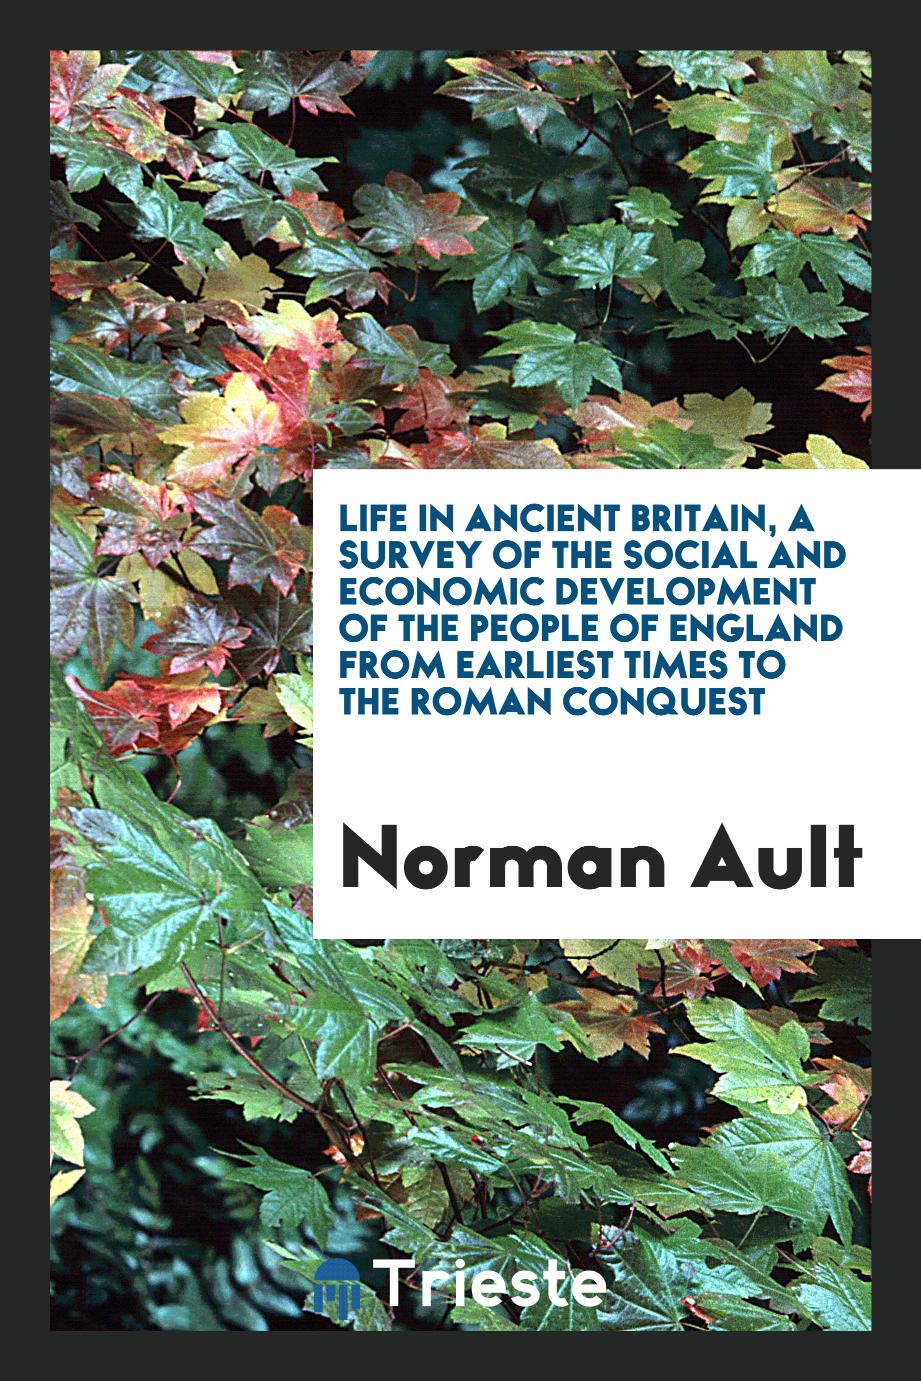 Life in ancient Britain, a survey of the social and economic development of the people of England from earliest times to the Roman conquest